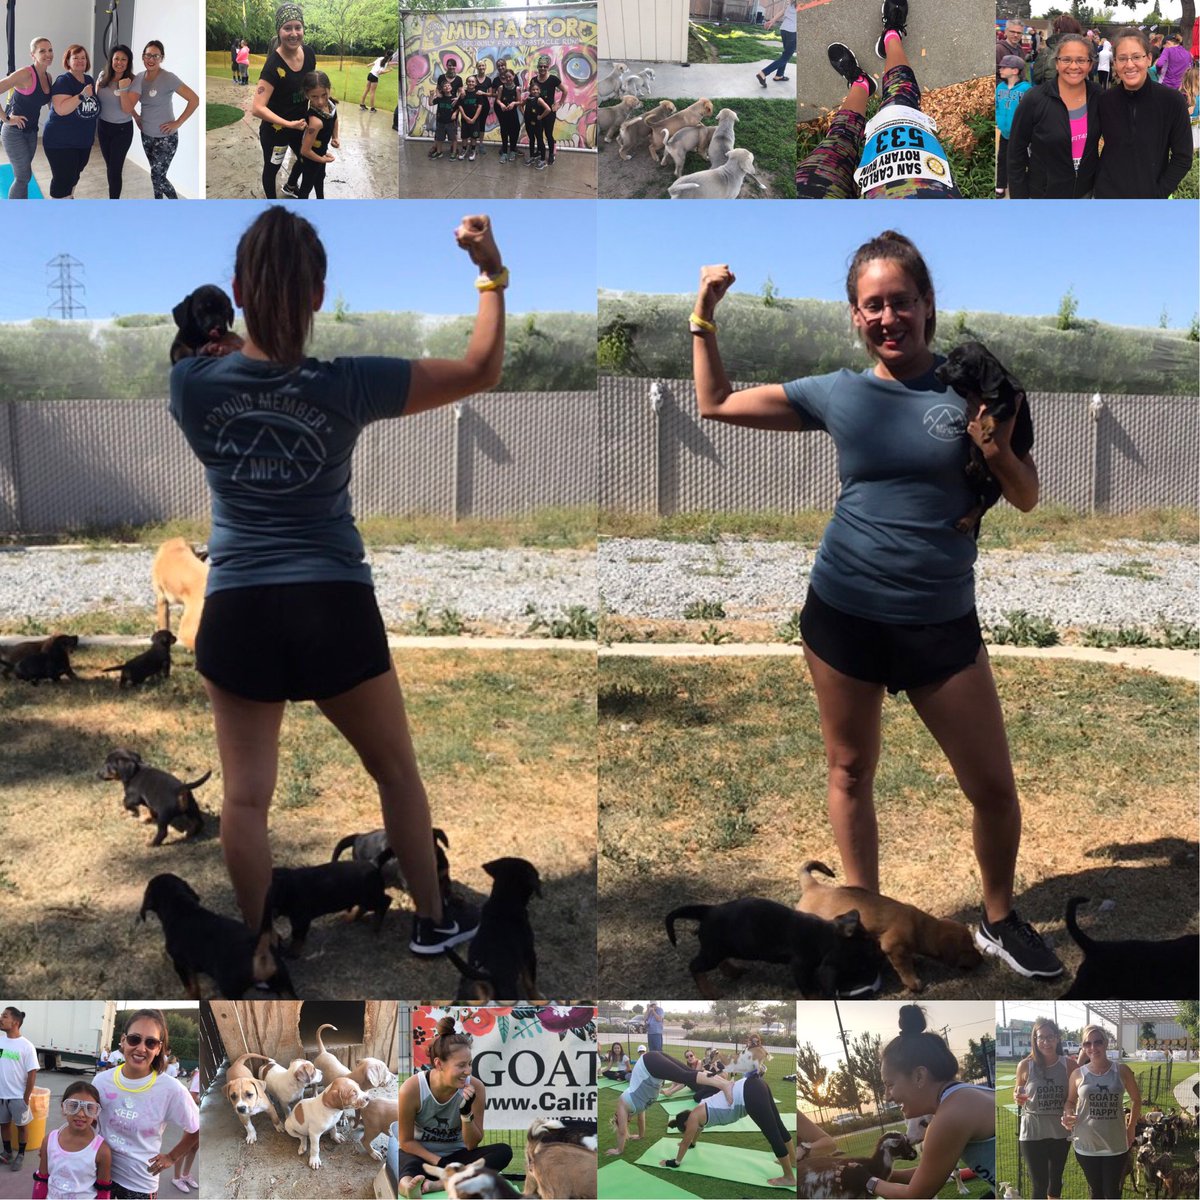 #MPC2018 highlightS
-My first peaker meeting 
-Mud Run 
-12k Run
-Bubble Run
-1st time goat yoga 
-39 foster puppies
@MyPeakChallenge @SamHeughan 
Ready to continue peaking #MPC2019